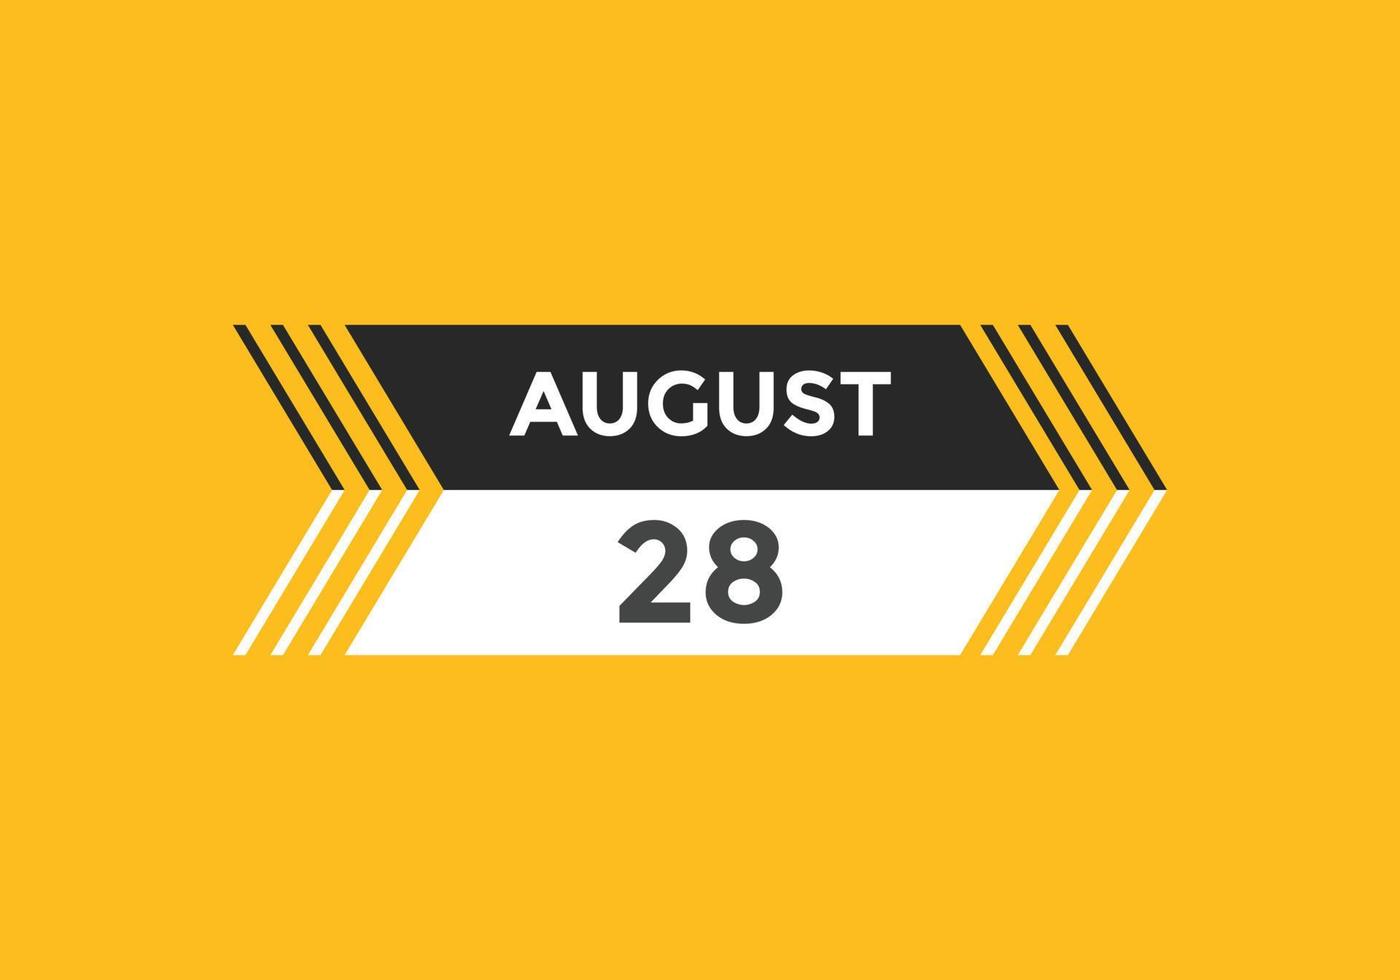 august 28 calendar reminder. 28th august daily calendar icon template. Calendar 28th august icon Design template. Vector illustration